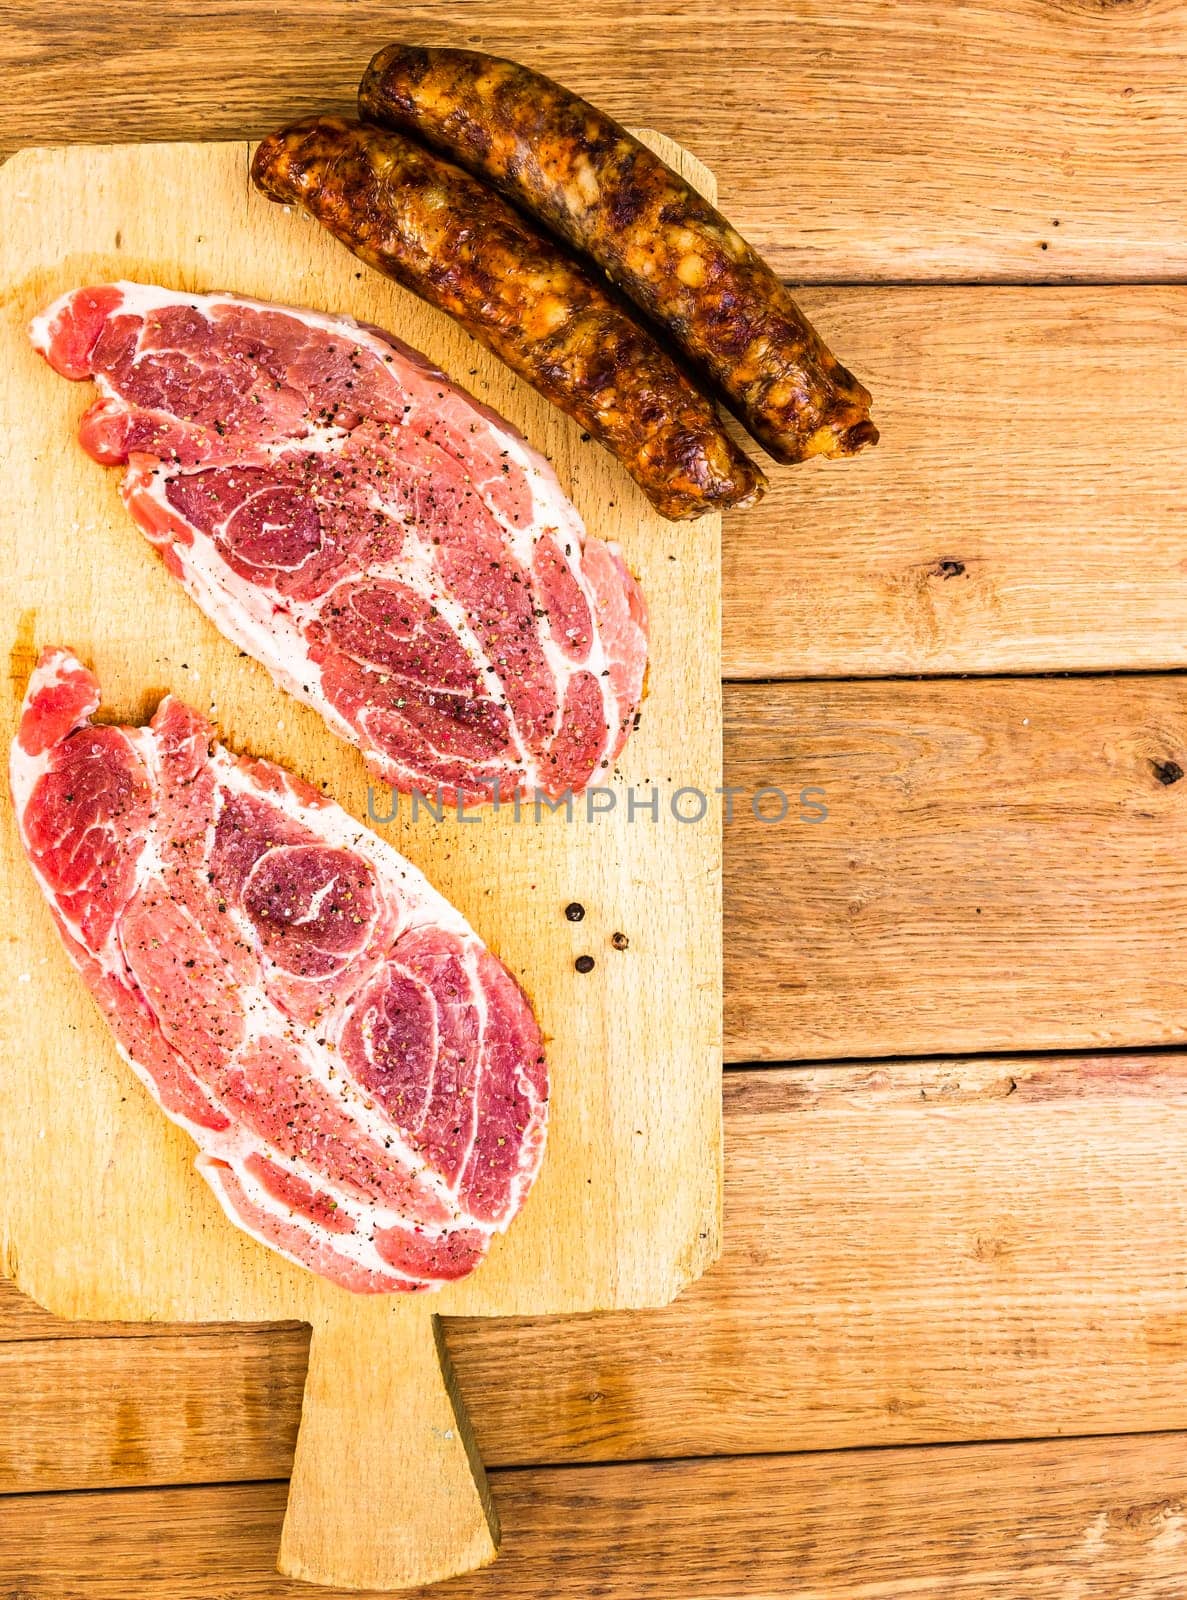 Pork chops with condiments and smoked sausage on a wooden cutting board over wooden table, meat for bbq, top view, copy space, barbeque concept